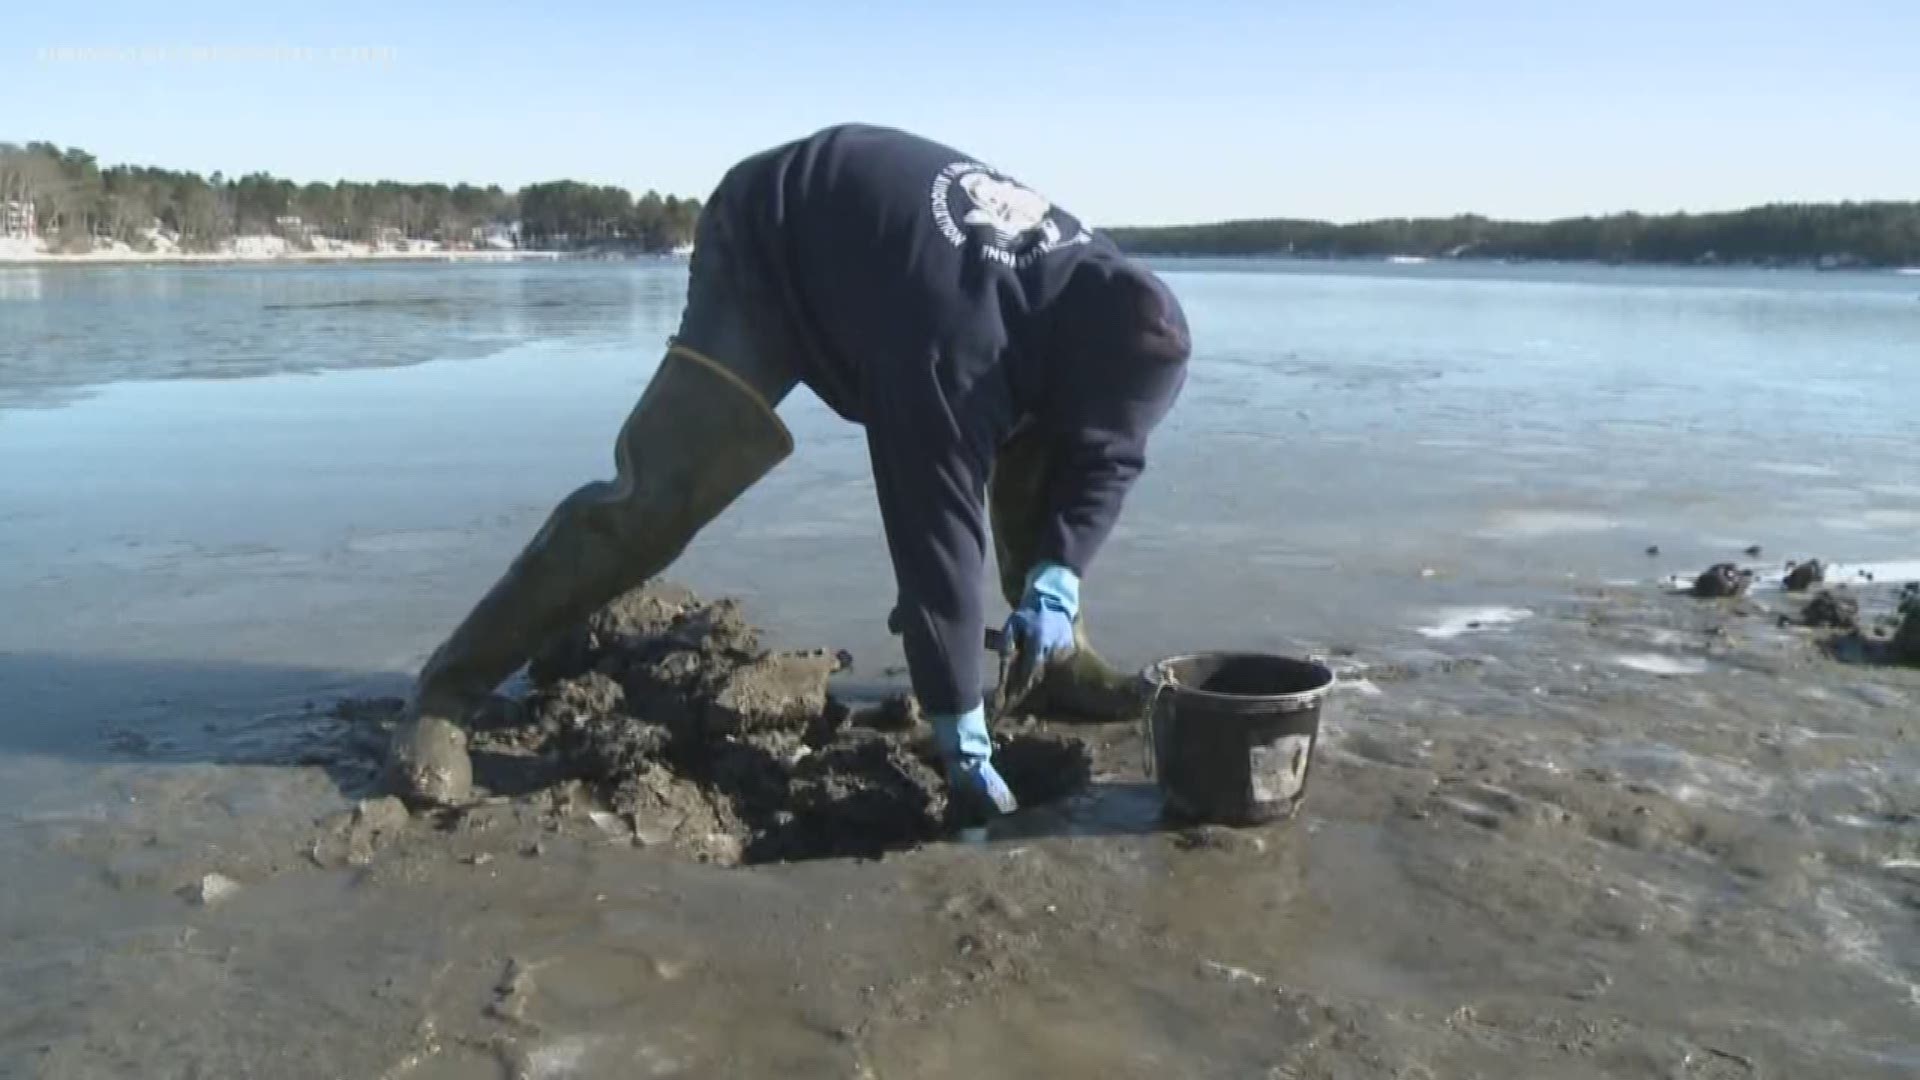 A large part of the Maine coast remains closed for harvesting of shellfish including clams, oysters, and mussels.